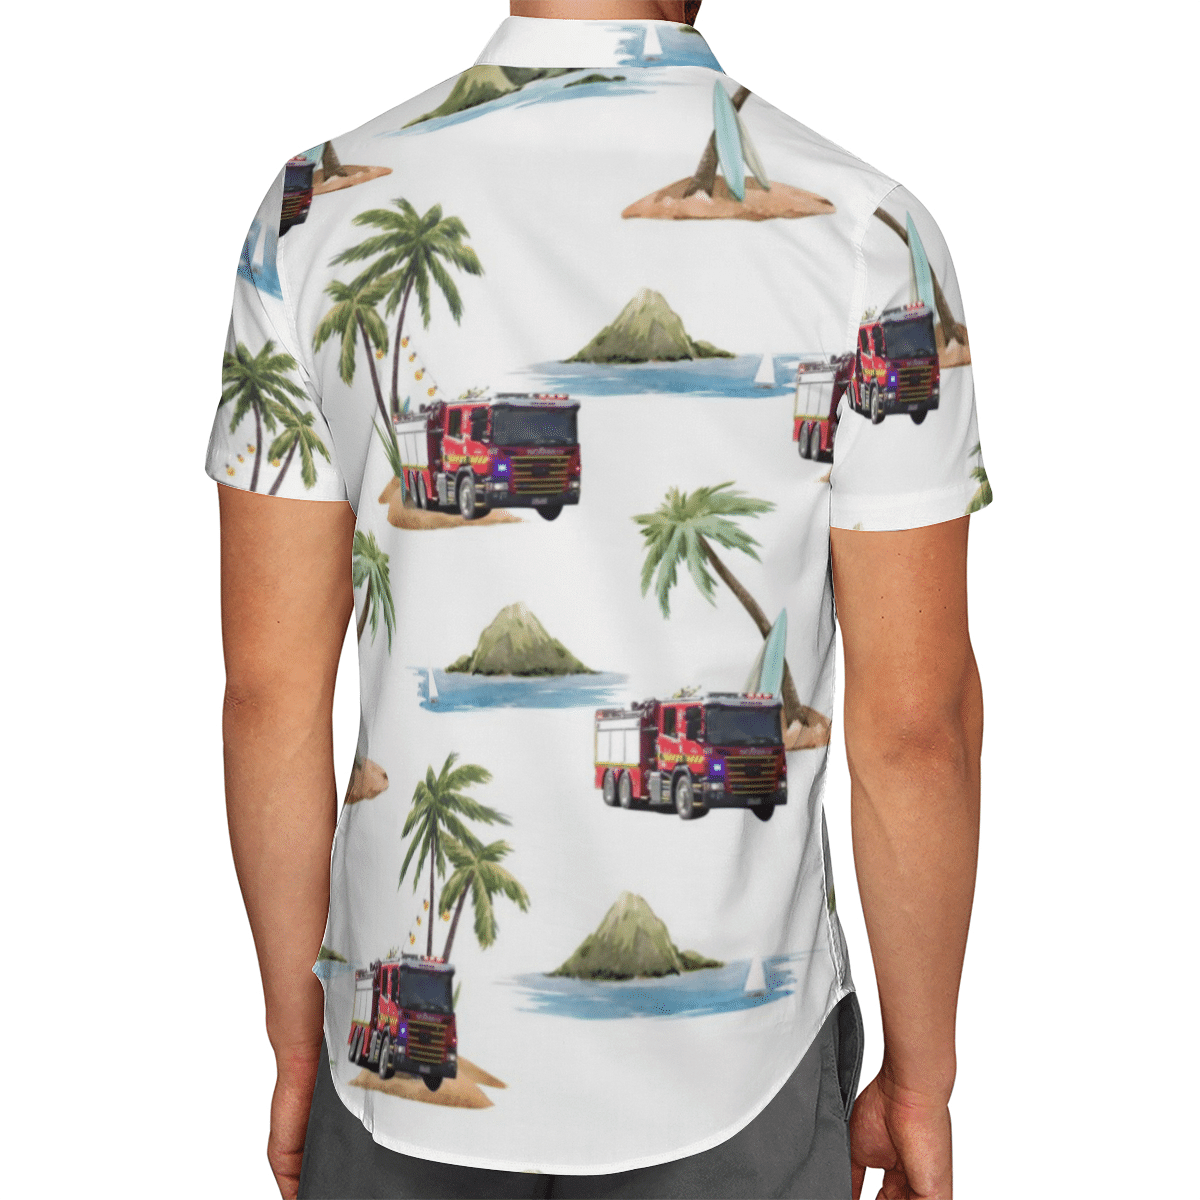 Find yourself or a group of friends a cool beach outfit idea 179